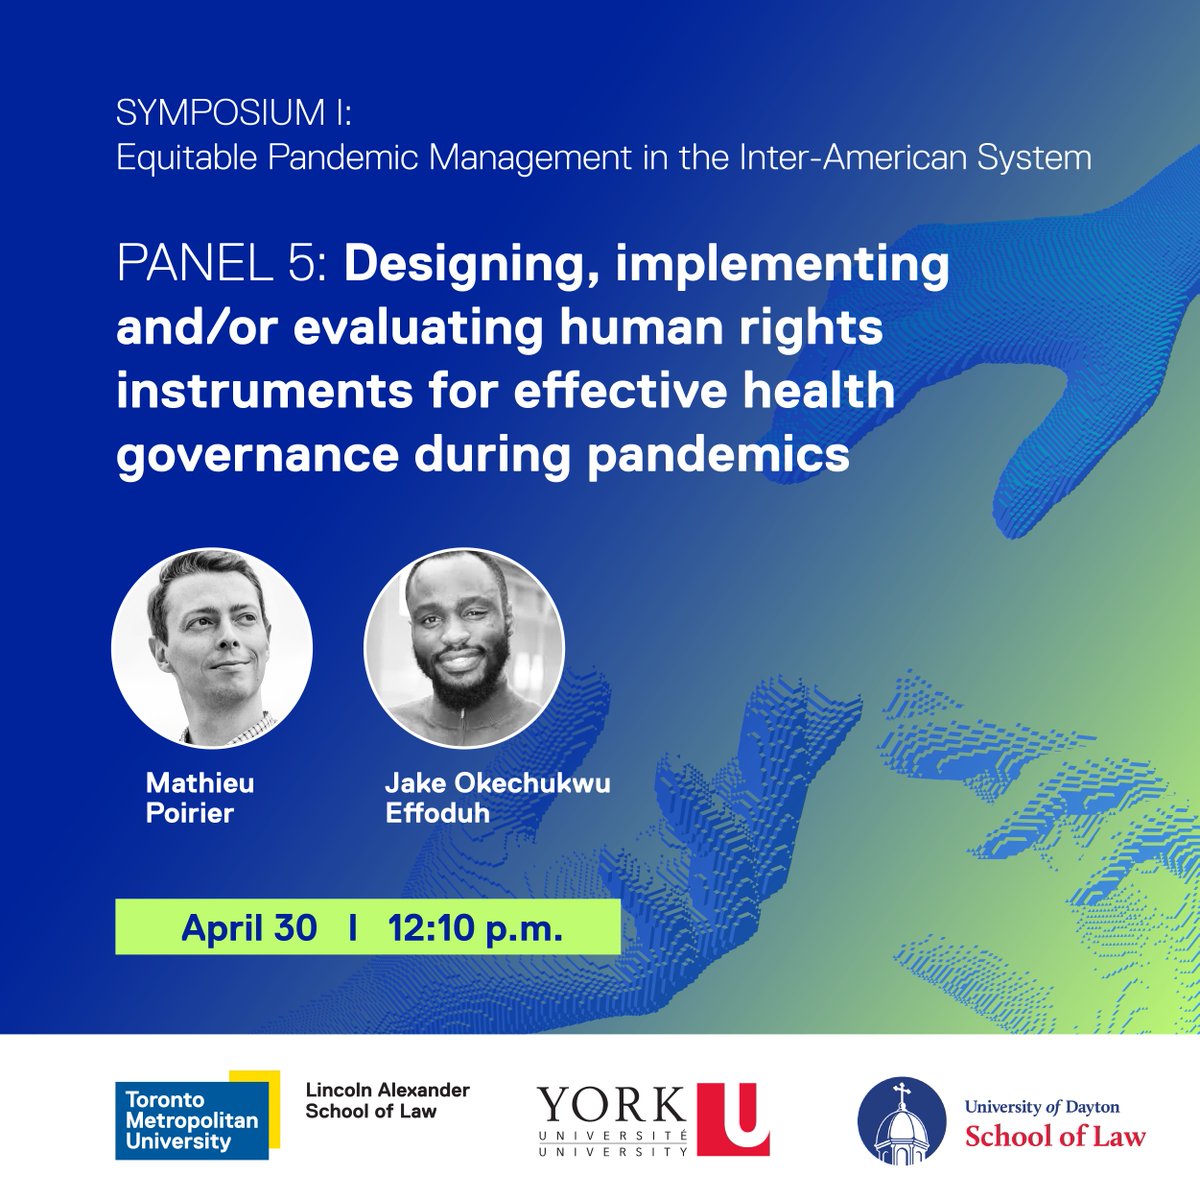 Panel 5 of 'Designing a Regional Health Governance Approach' is underway with @effodu and @MathieuJPP discussing designing, implementing and evaluating human rights instruments for effective health governance during pandemics. Tune in on Zoom: torontomu.zoom.us/j/92172612971